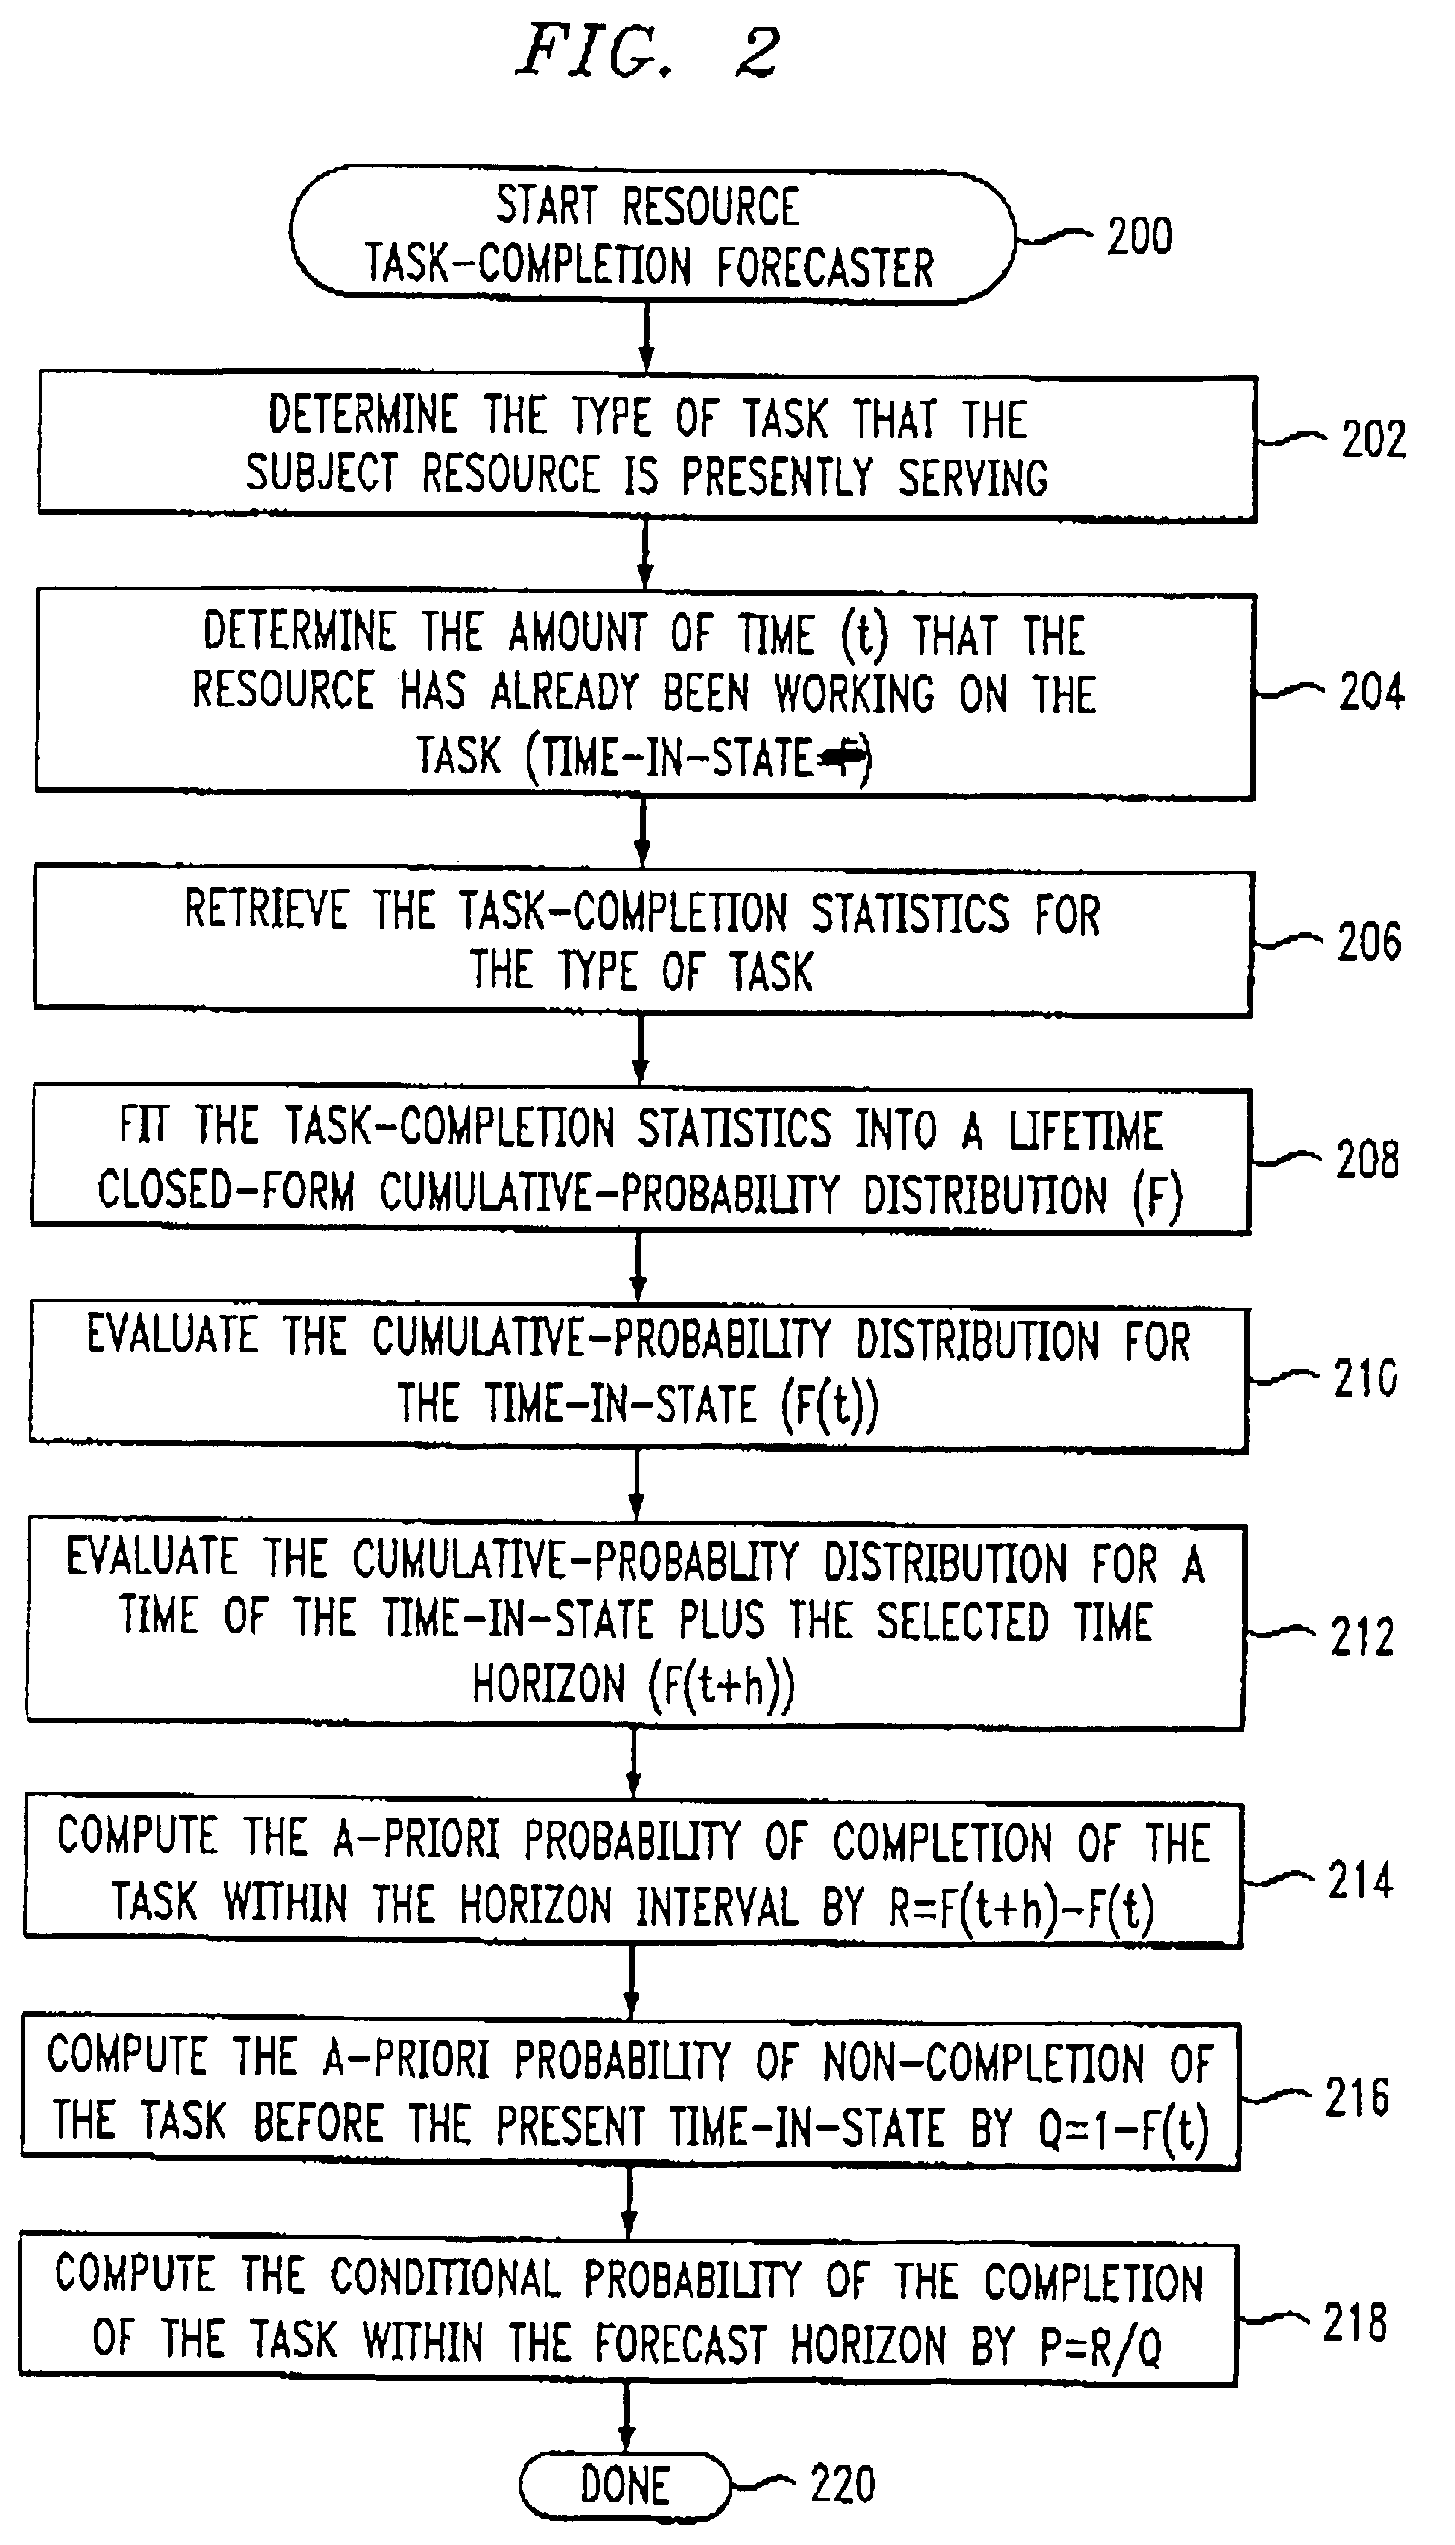 Arrangement for scheduling tasks based on probability of availability of resources at a future point in time